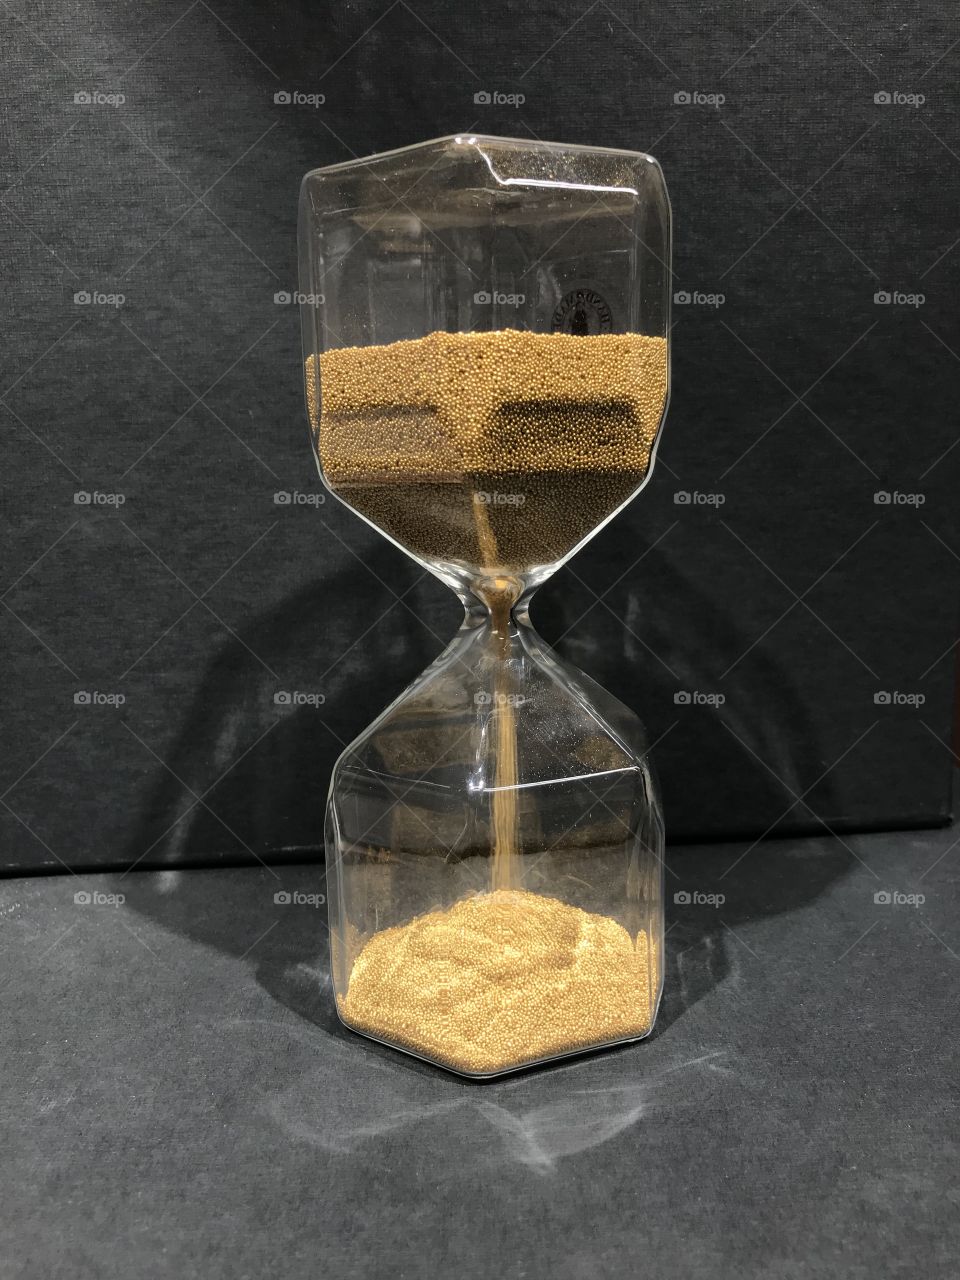 A clear, gold hourglass is flipped upside down and the sand starts running through.